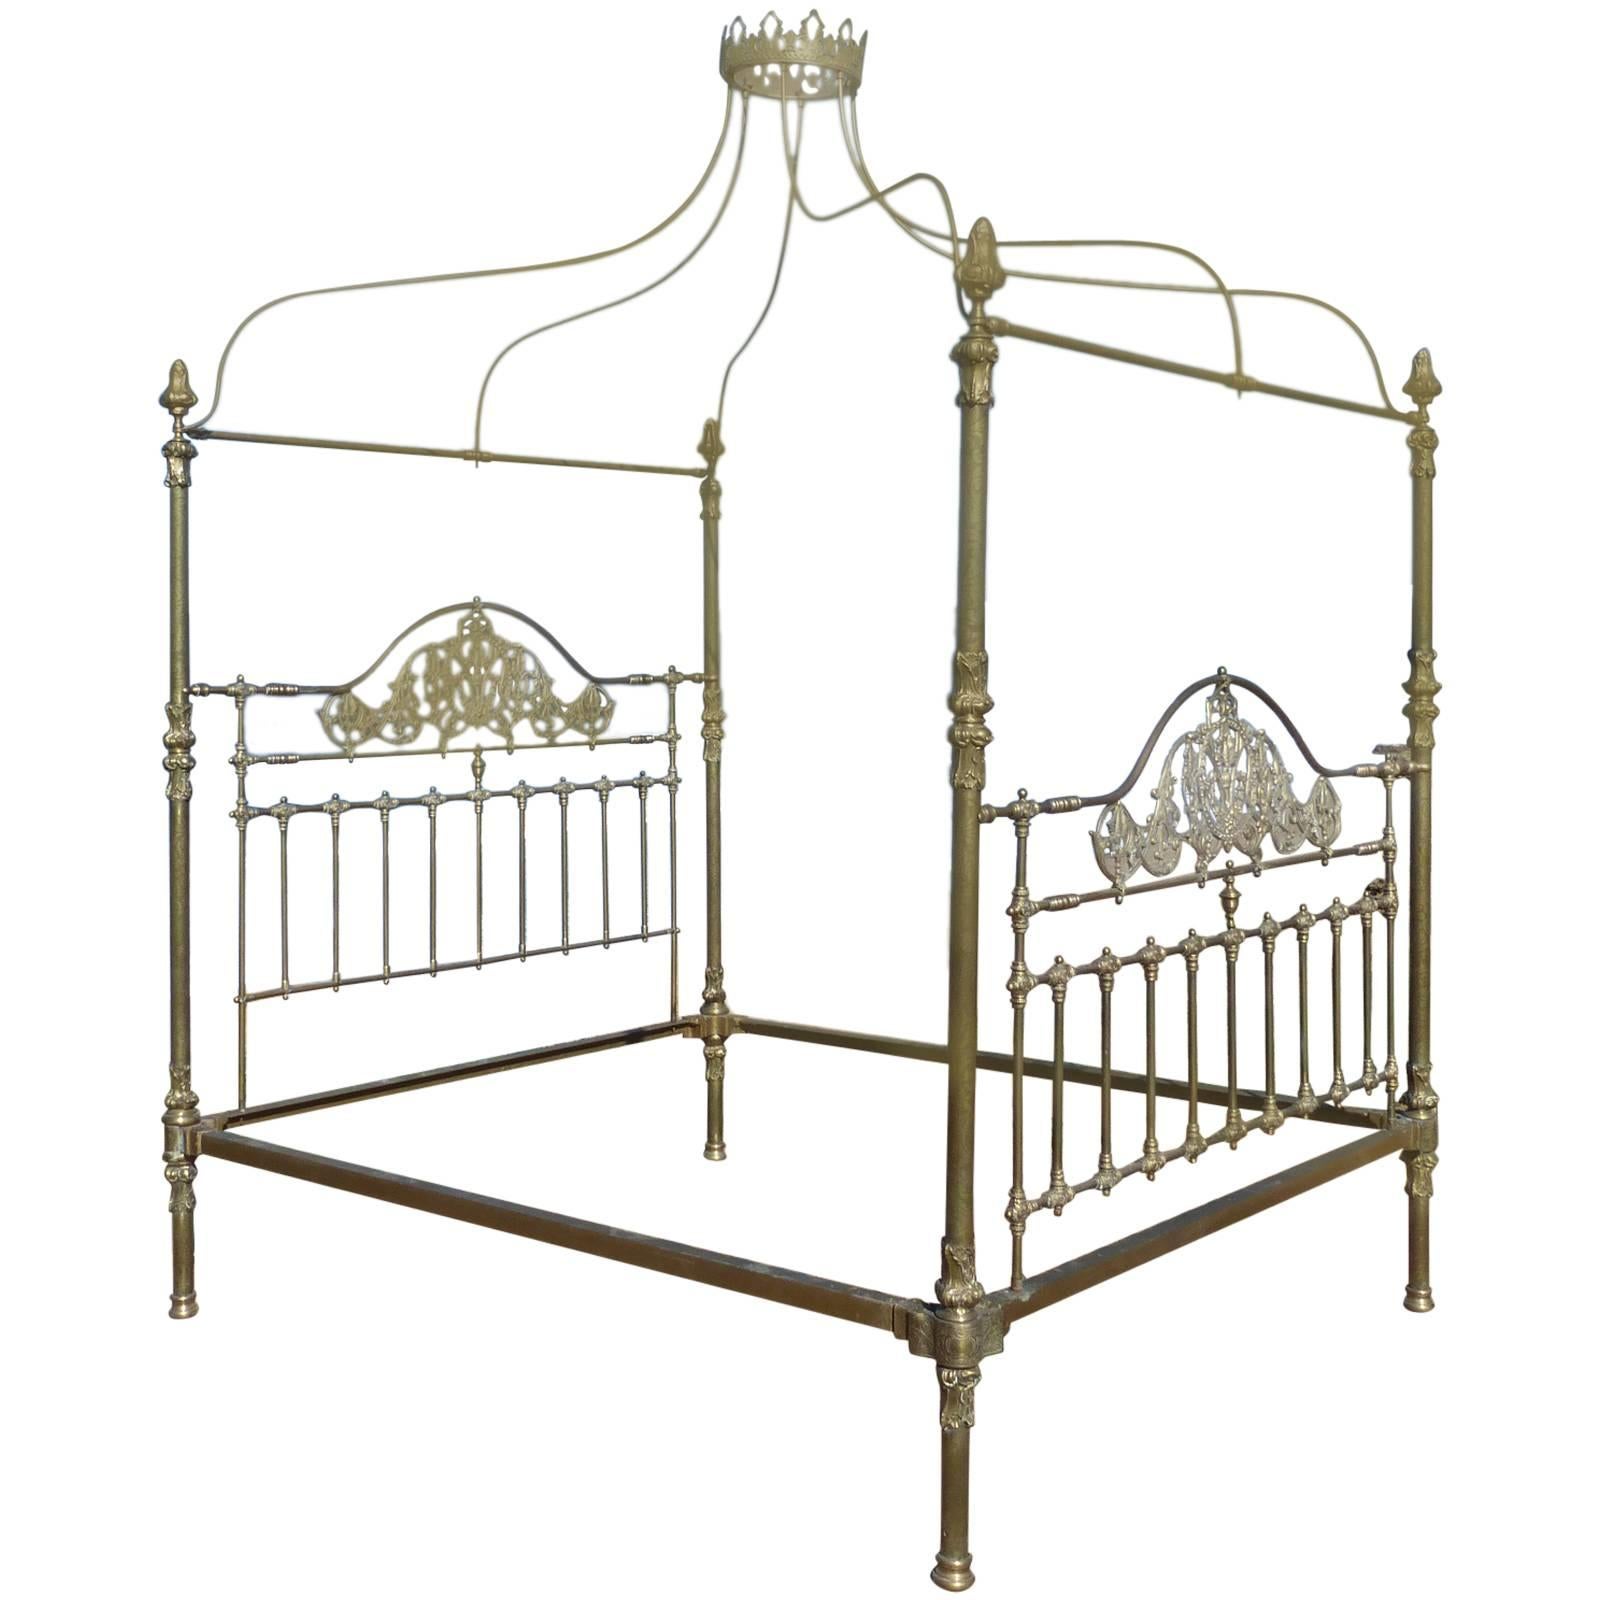 All Brass Crown and Canopy Four-Poster Bed